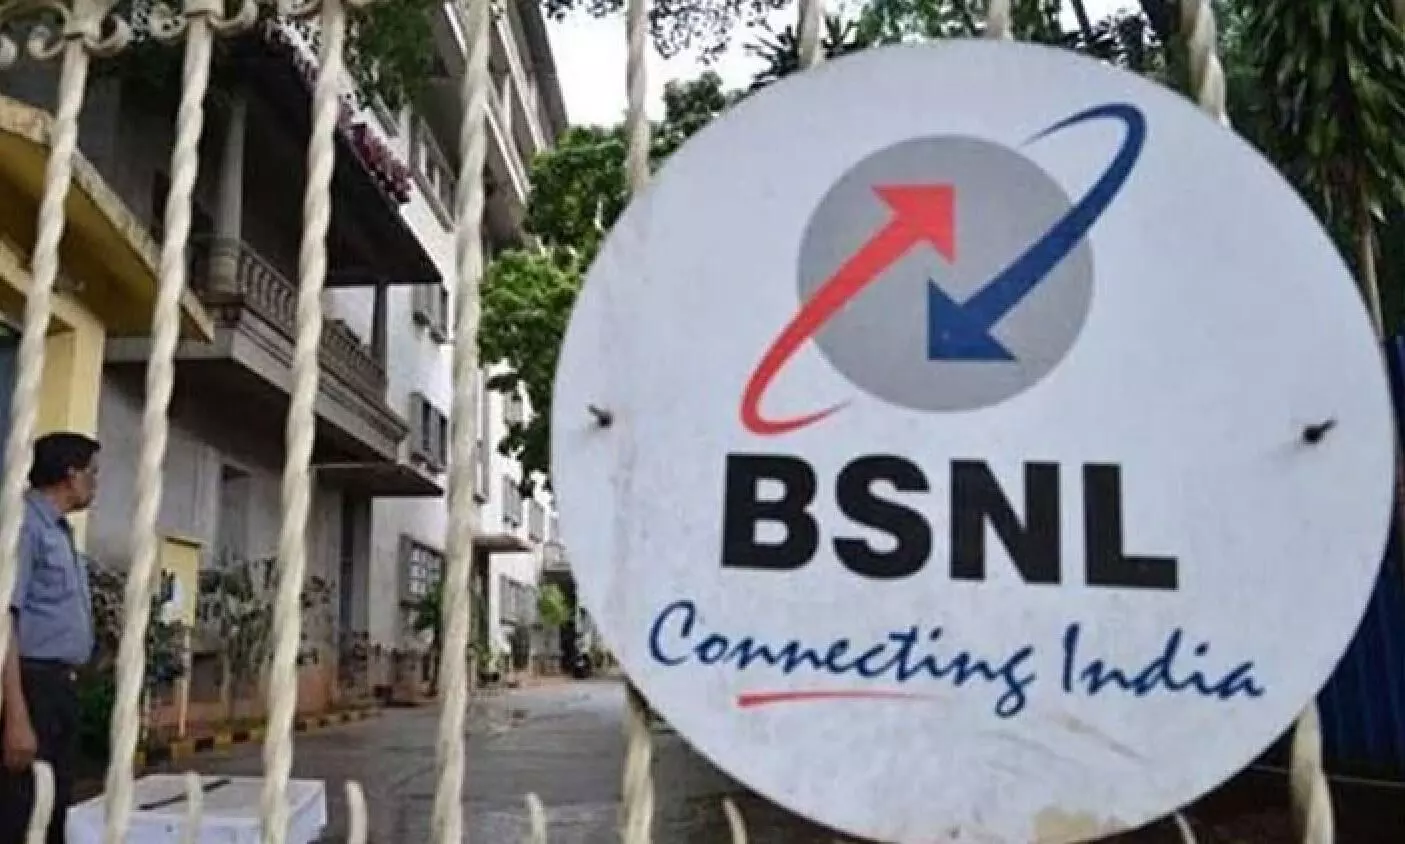 Why BSNL still trying to procure outdated 4G equipment, asks Himachal Pradesh High Court